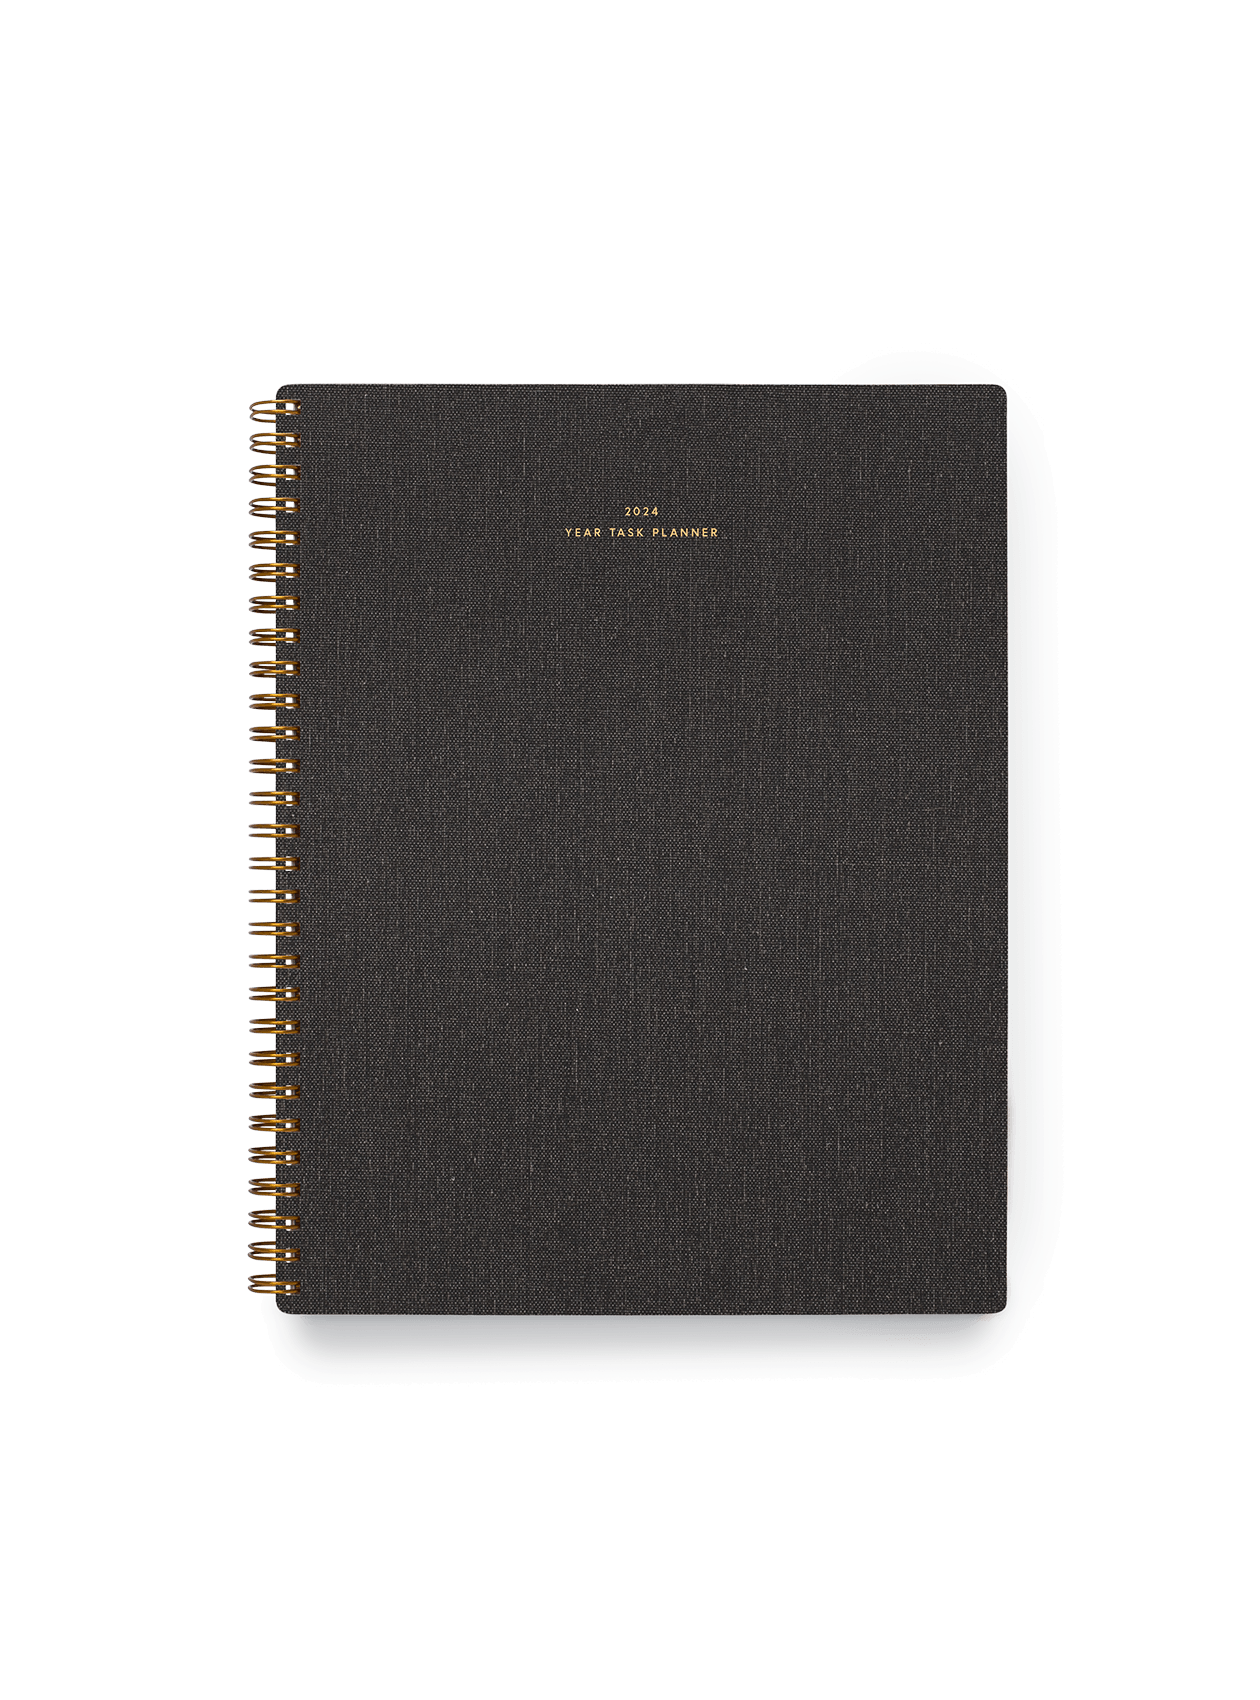 The Appointed 2024 Year Task Planner in Charcoal Gray with brass wire-o binding, foil details, and textured bookcloth covers || Charcoal Gray